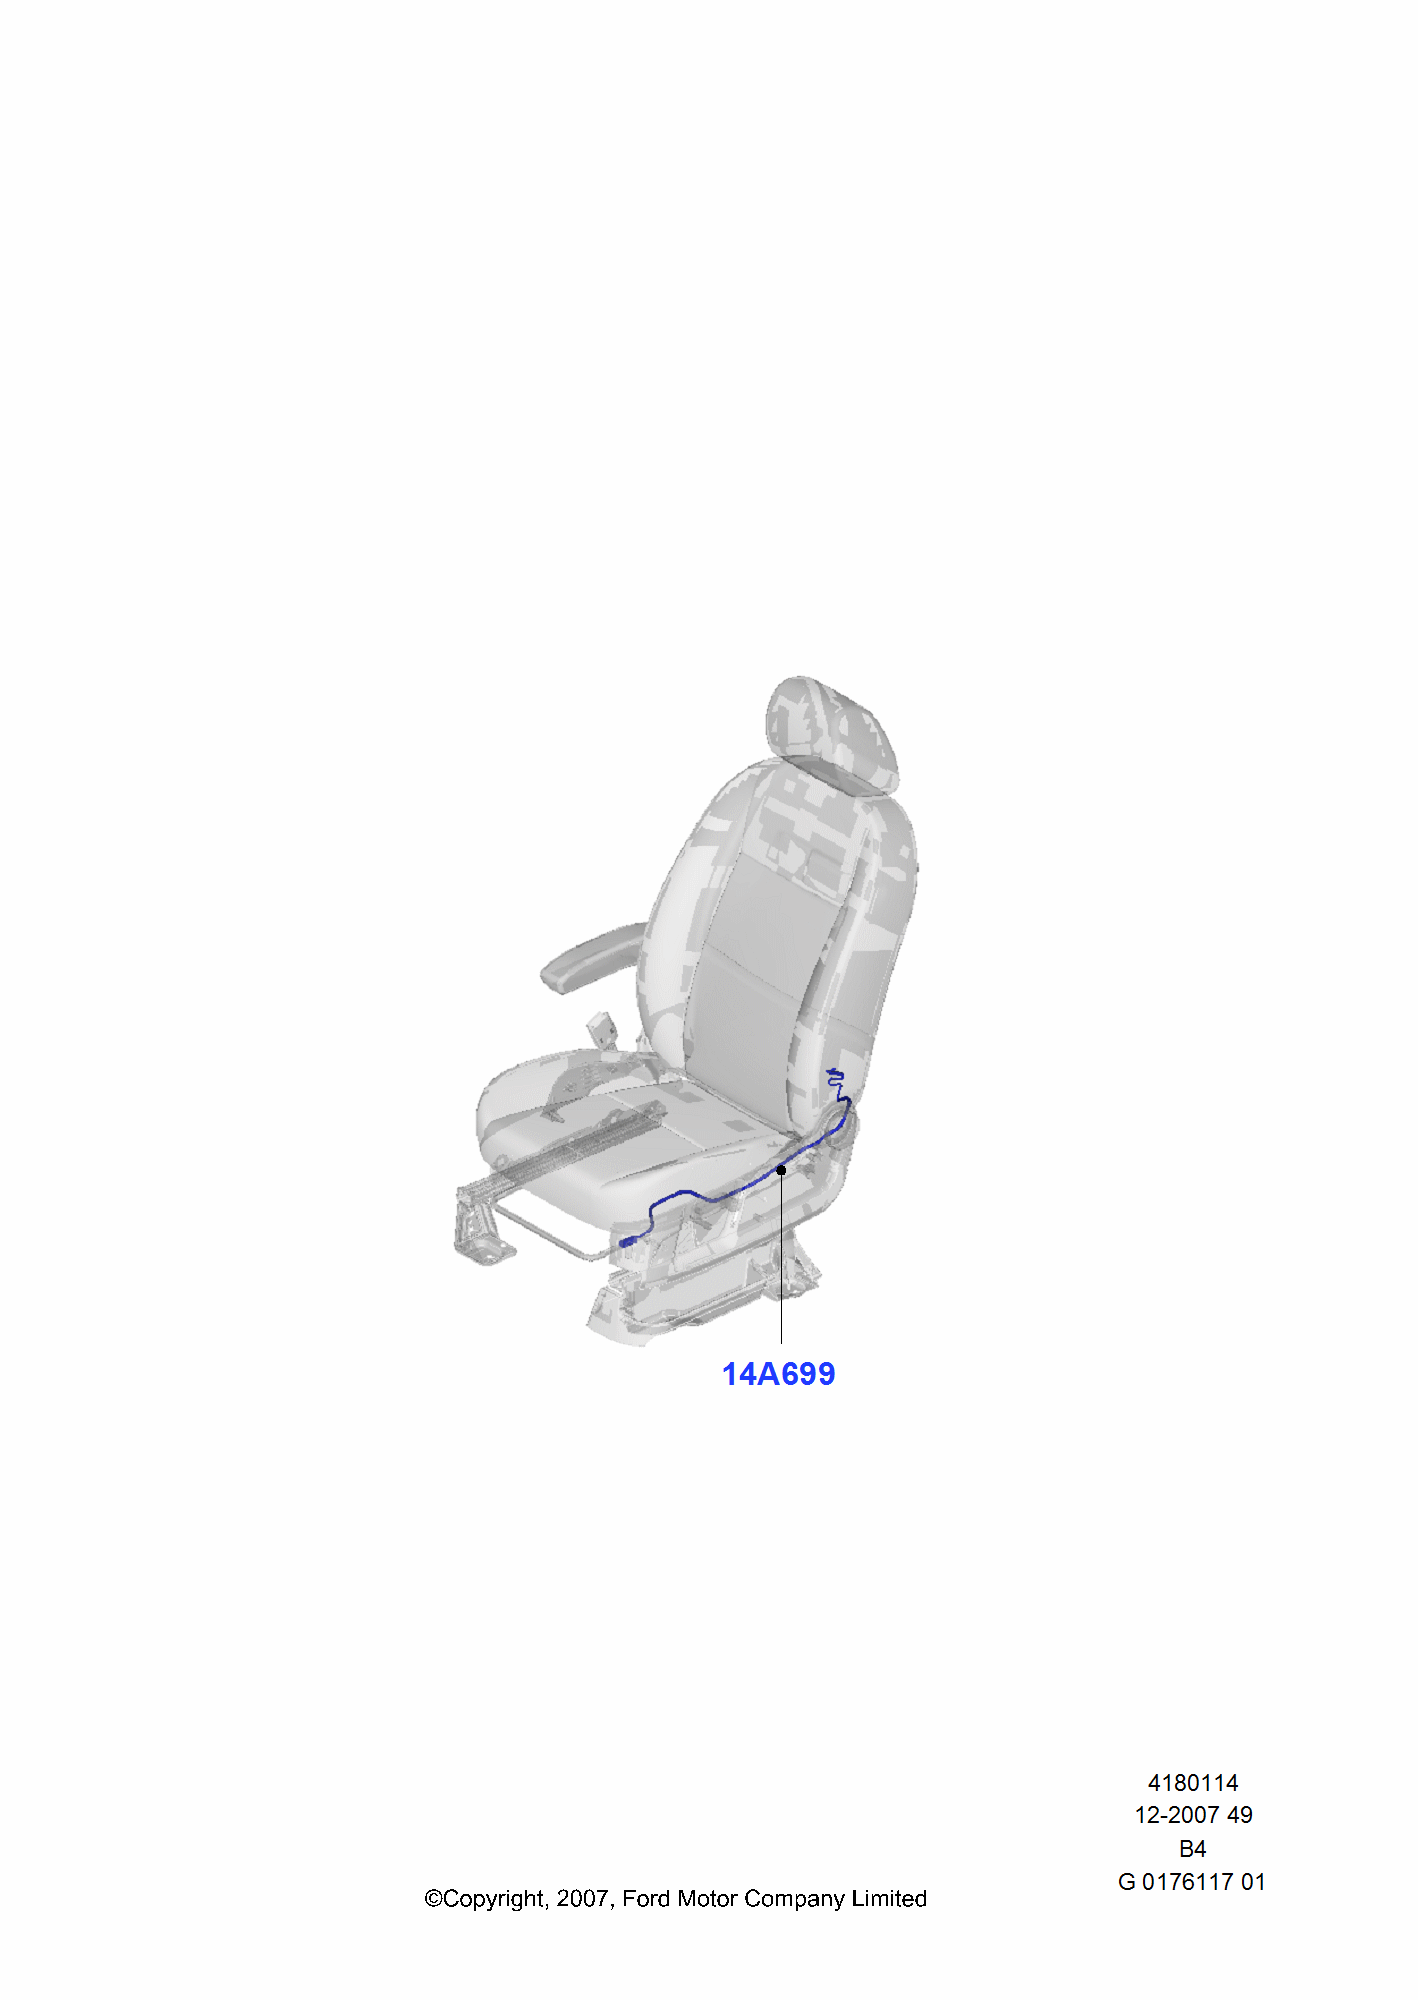 Wiring - Seats for Ford Focus Focus 2008-2011           (CB4)